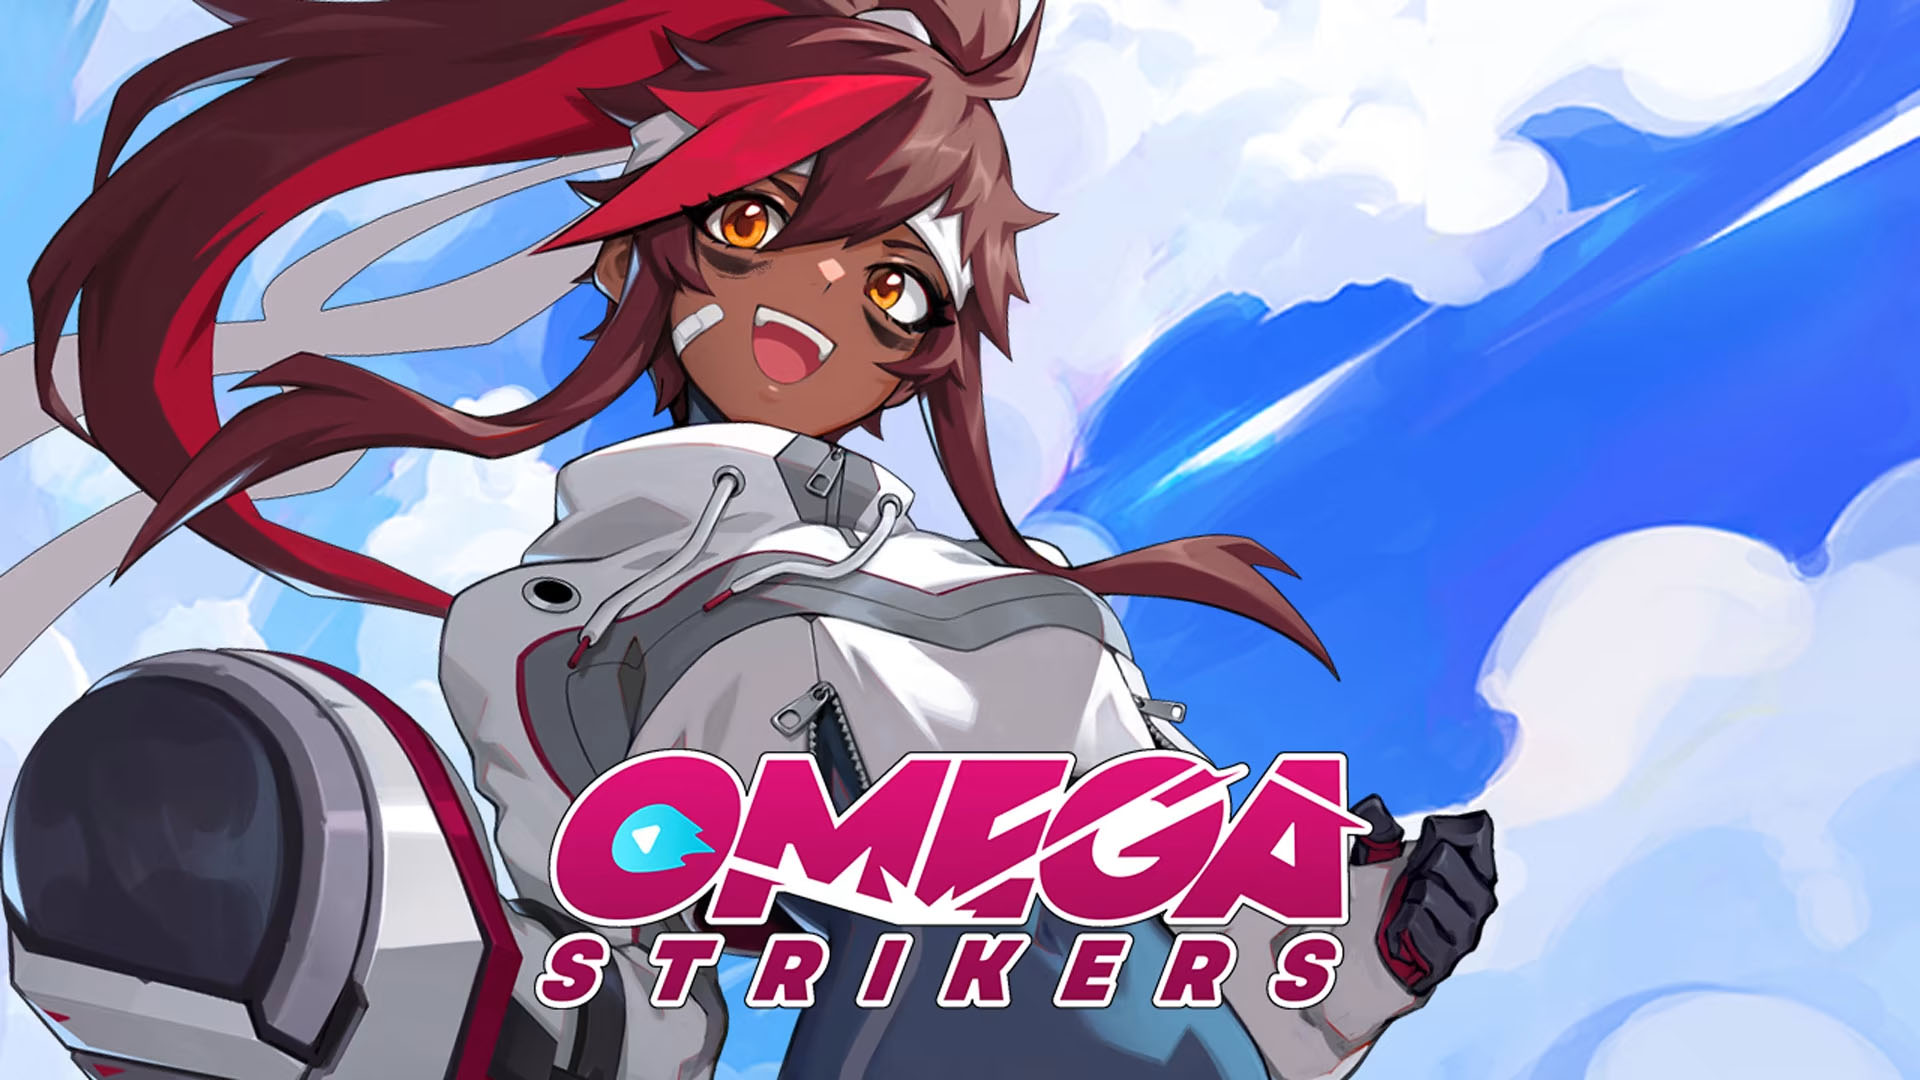 Omega Strikers Confirmed For Xbox Release On April 27th